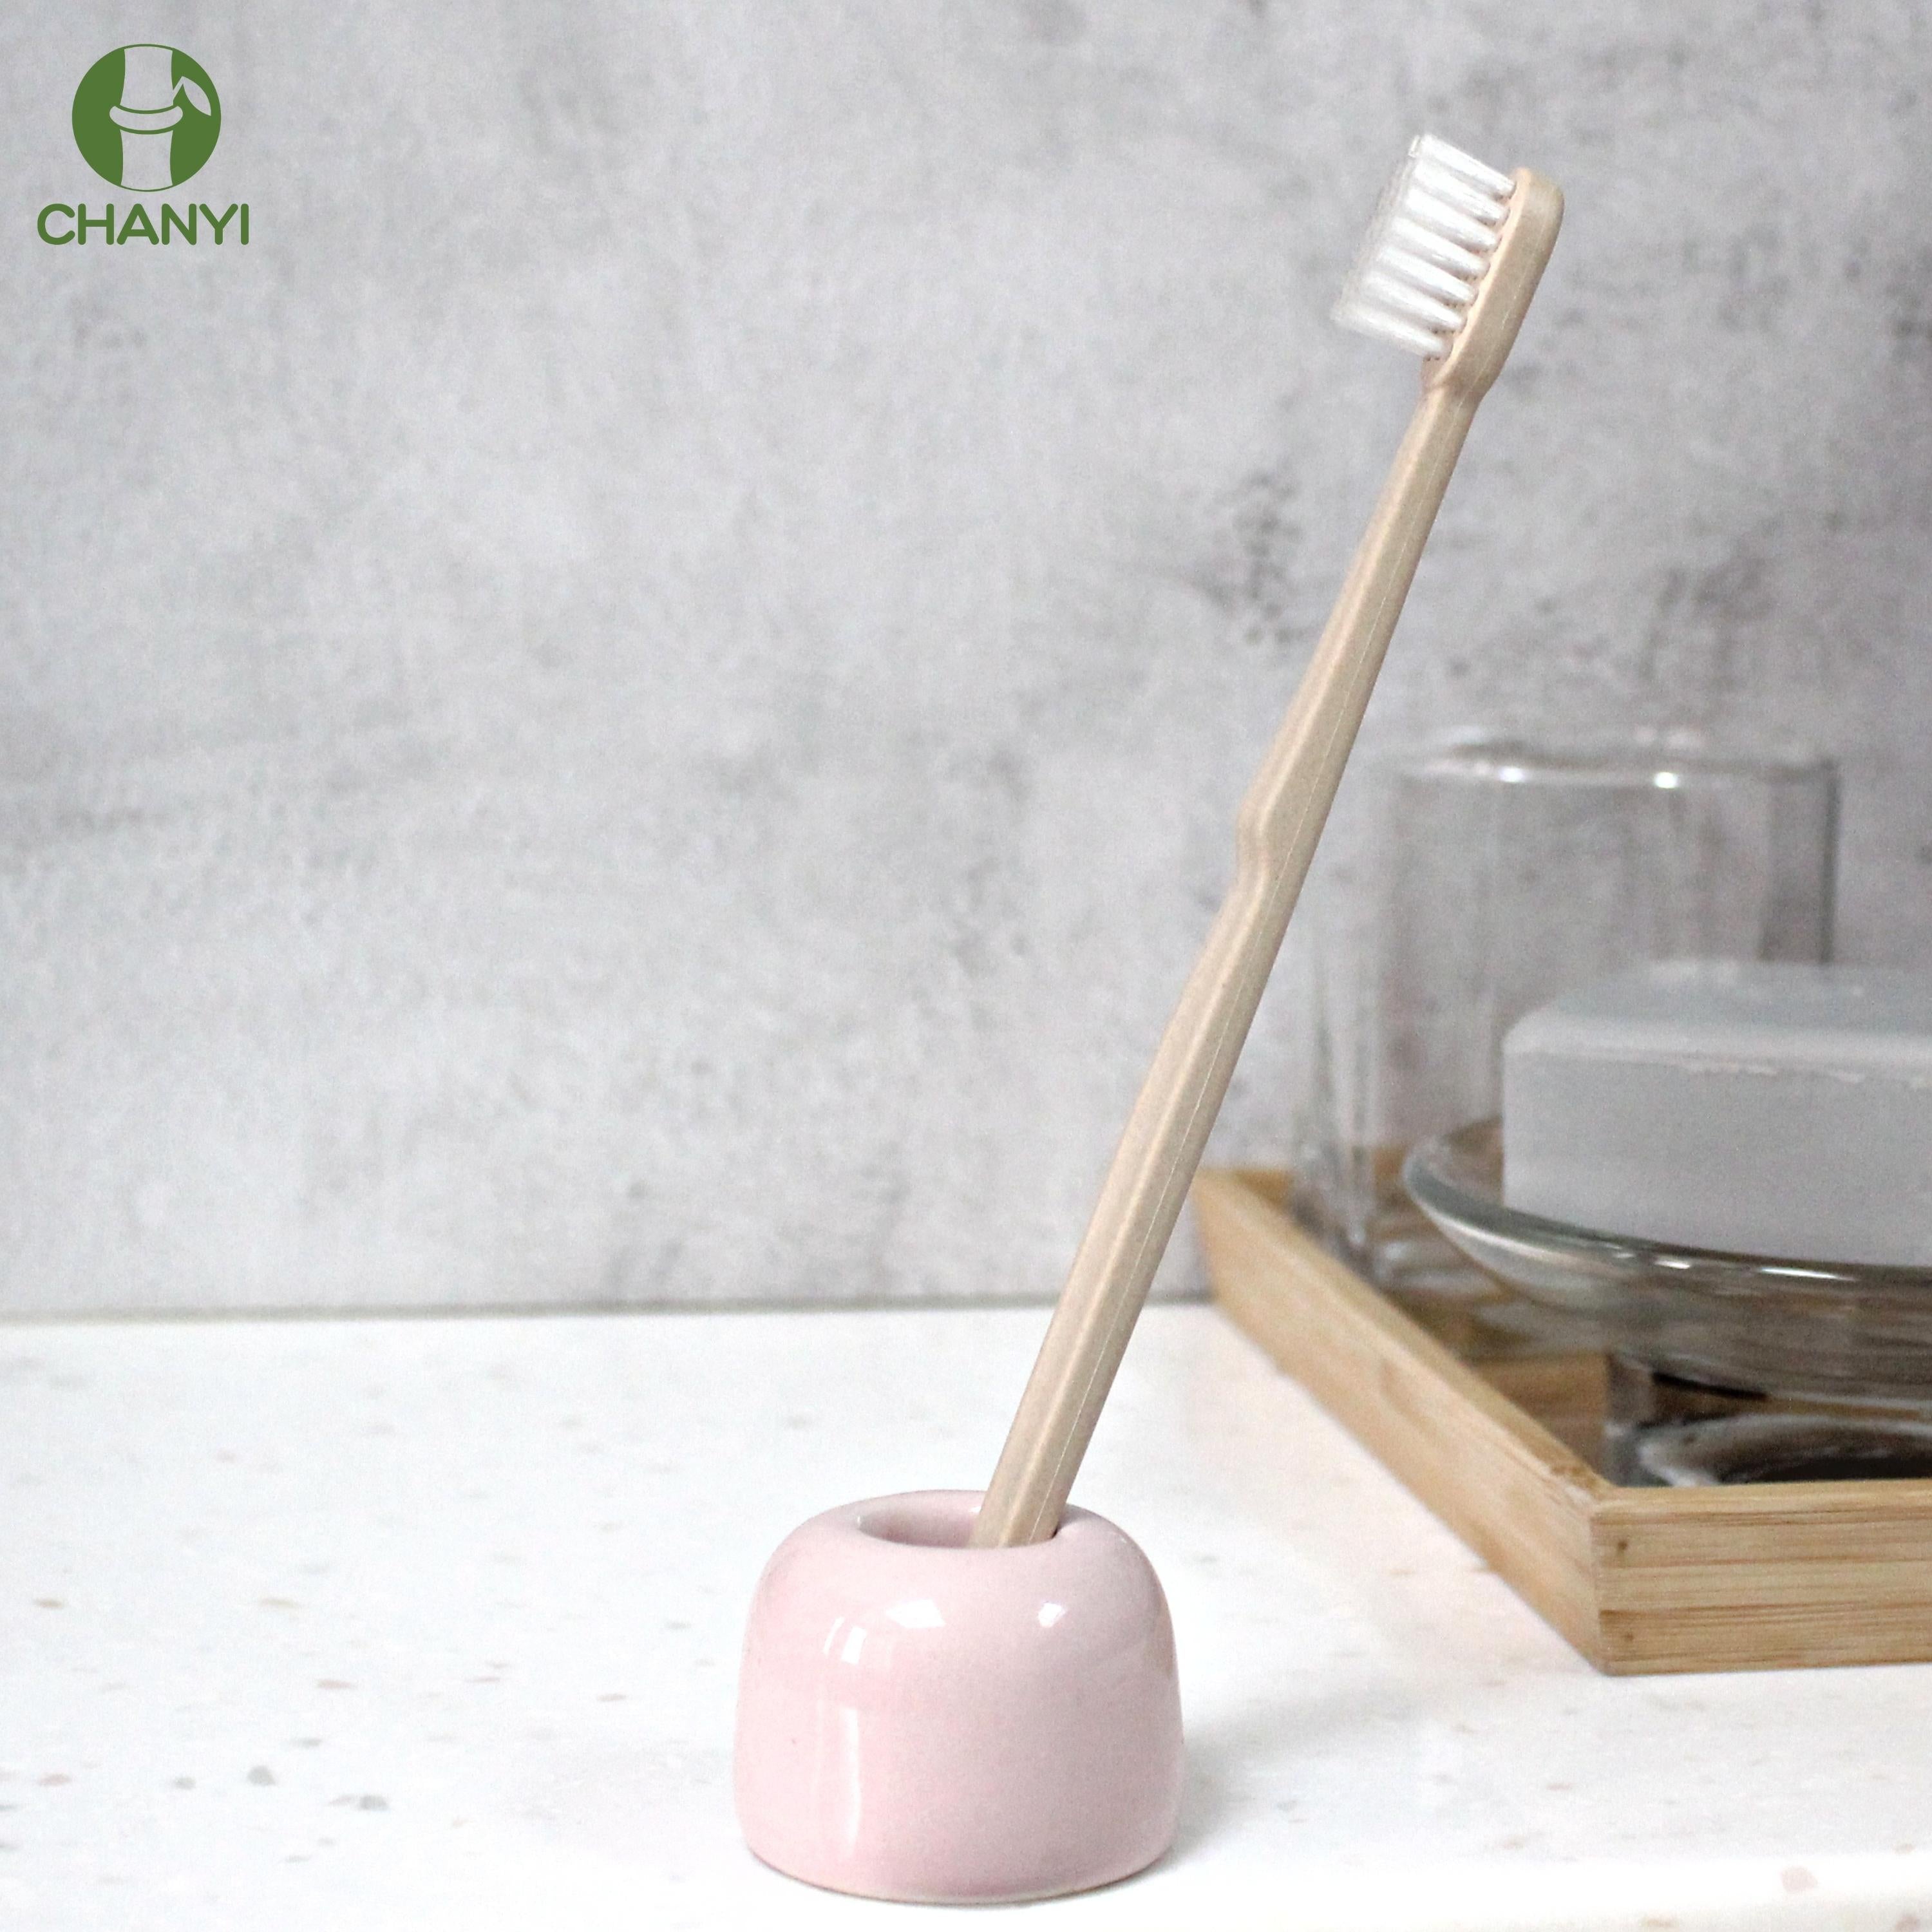 https://chanyi-eco.com/cdn/shop/products/travelkithoteleco-friendlycompostablesustainablebambootoothbrushnaturalbpa-freerecyclablegreensoftbristlesdisposablemanualdentist-approvedtoothbrushes4pcs-CHANYIeco.jpg?v=1661154669